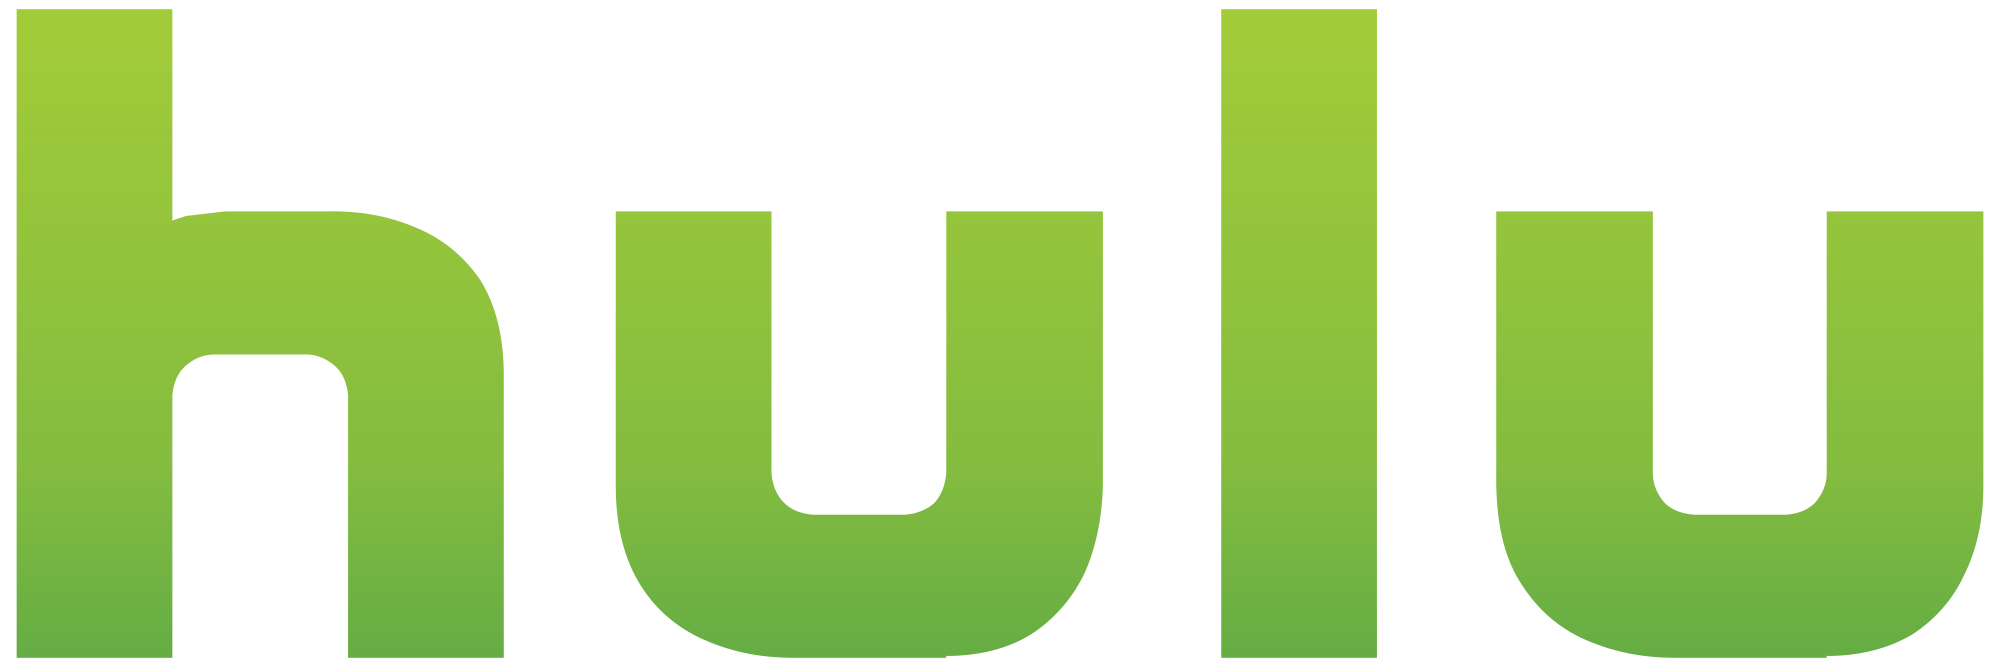 HULU is a valued PLANNET data center consulting client